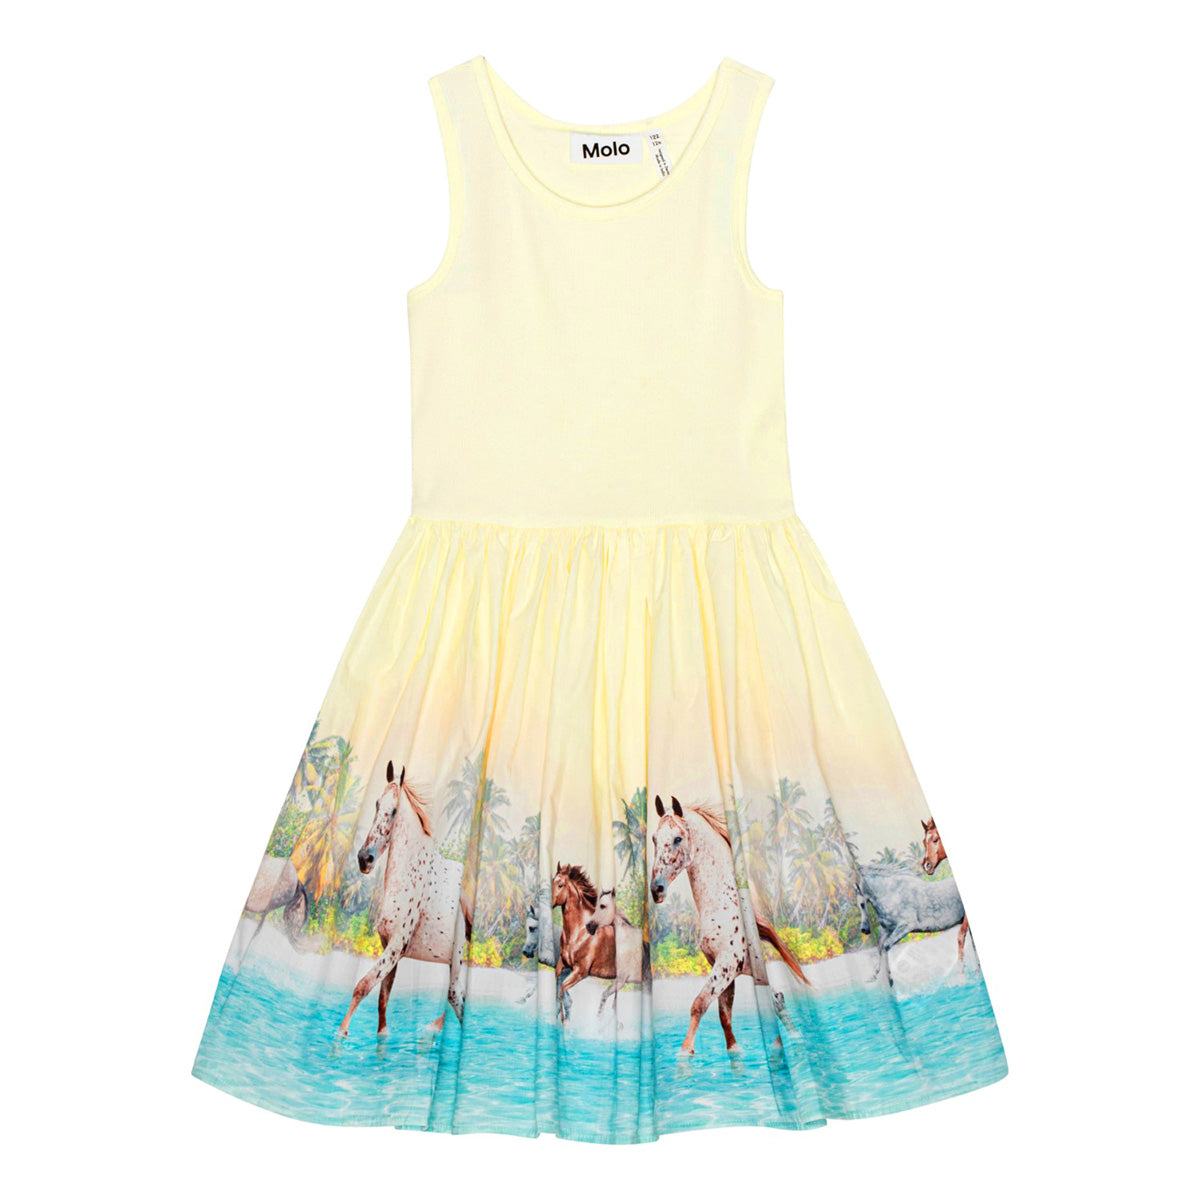 The Cassandra Dress from Molo. Pastel yellow strap dress swith a circular skirt in organic cotton